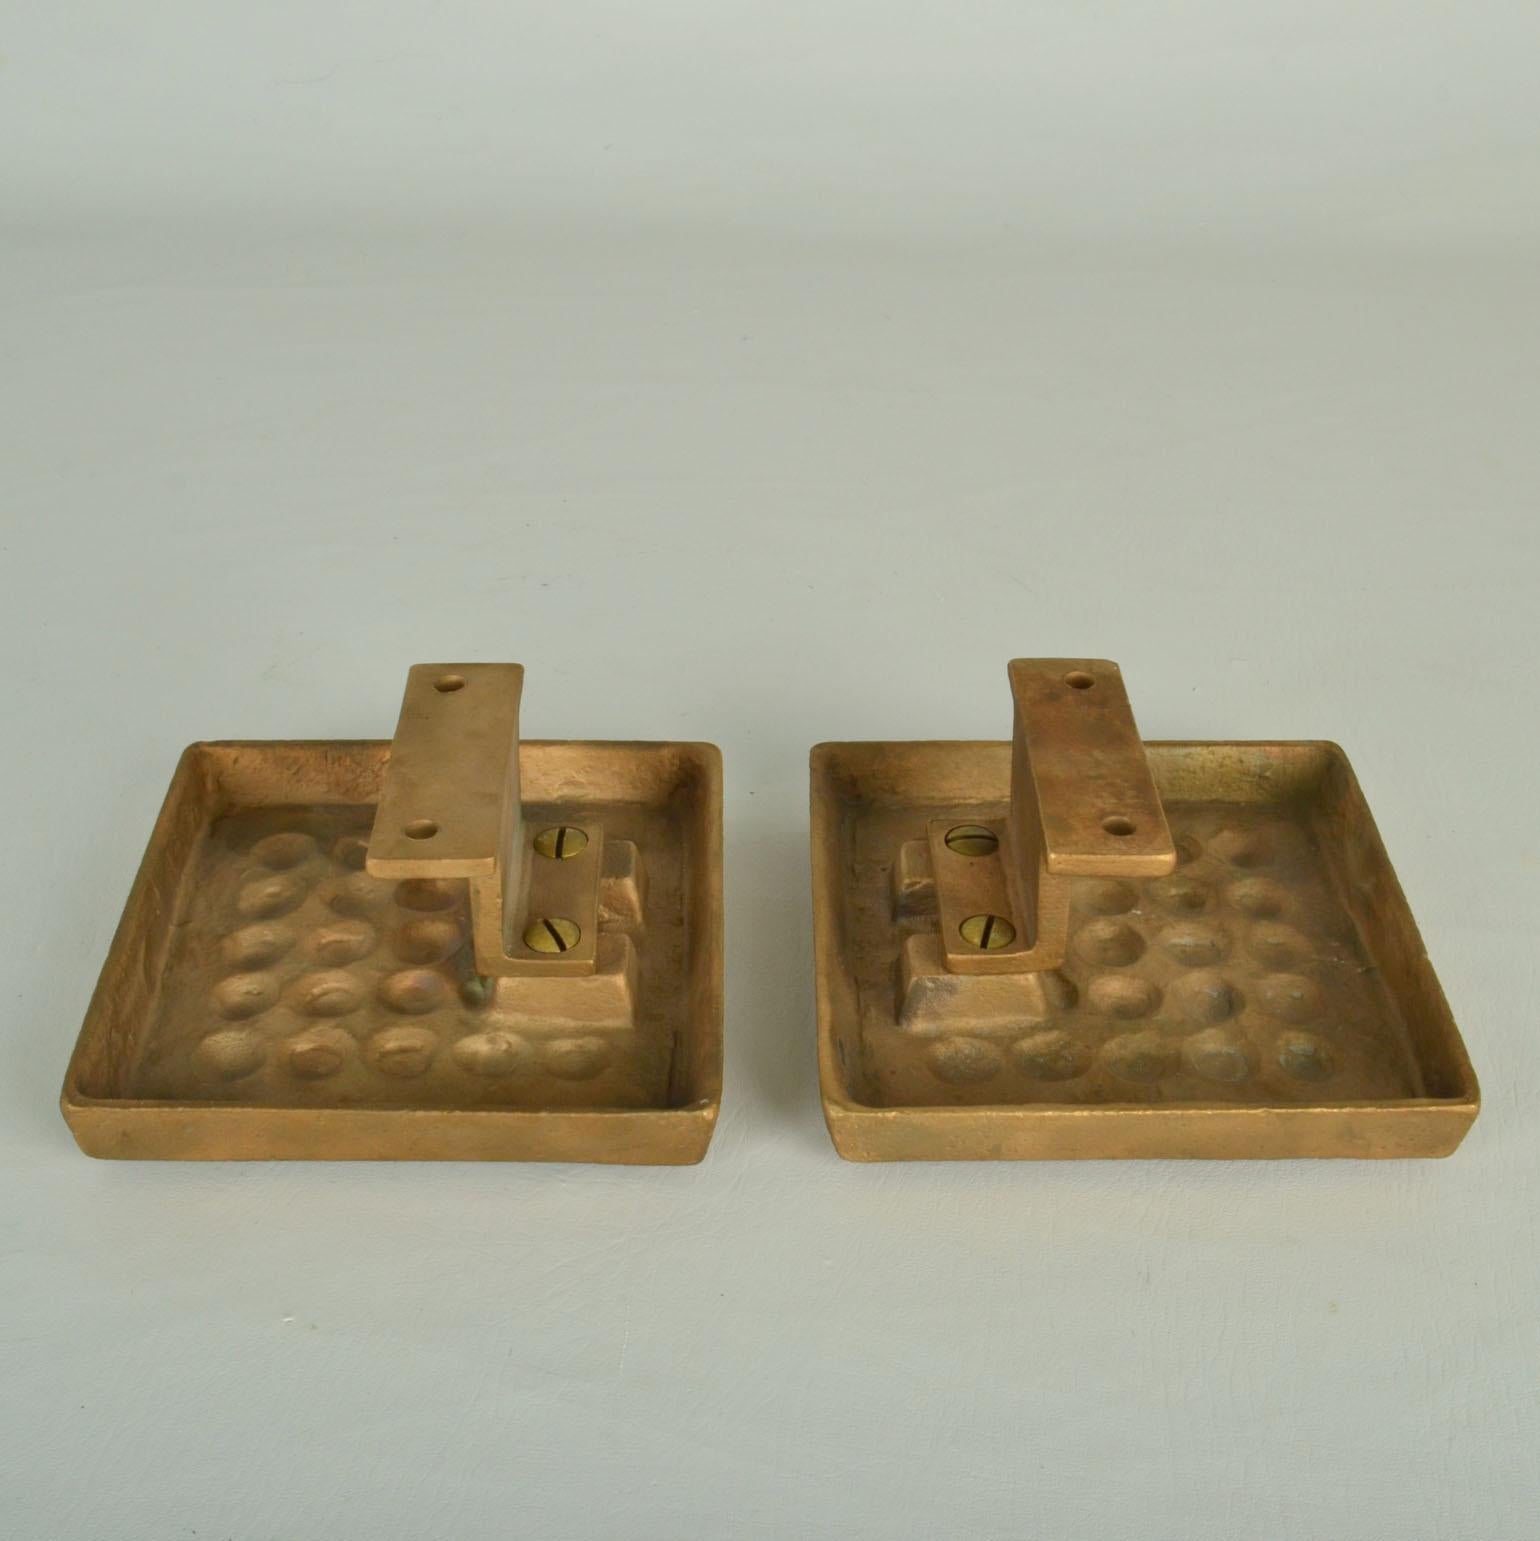 Late 20th Century Architectural Pair of Bronze Square Push Pull Door Handles with Geometric Relief